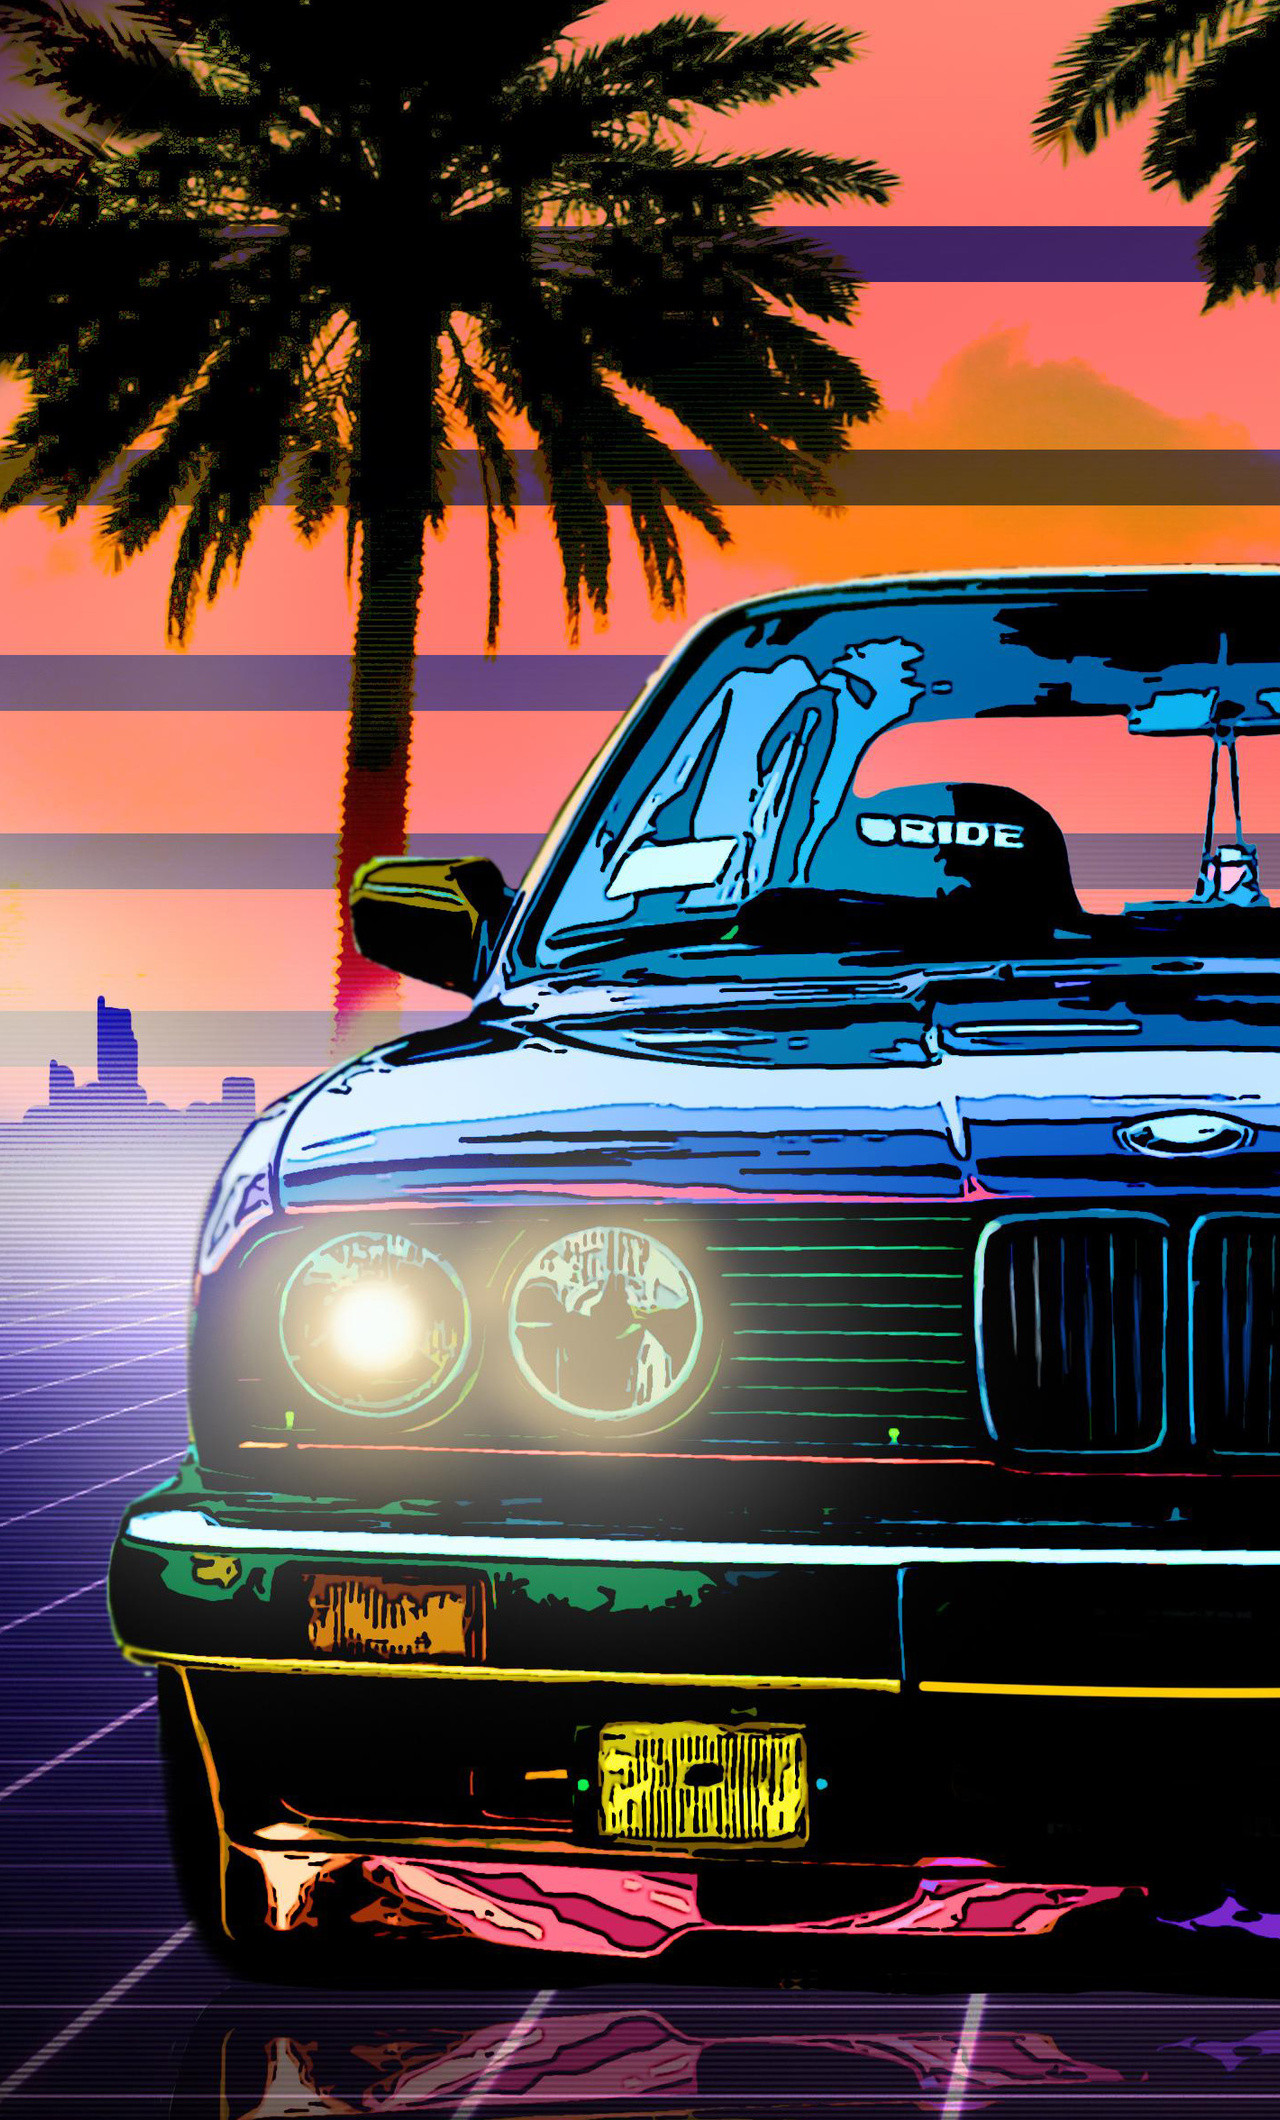 Artwork of a 1980s BMW 3 series in front of a sunset - BMW